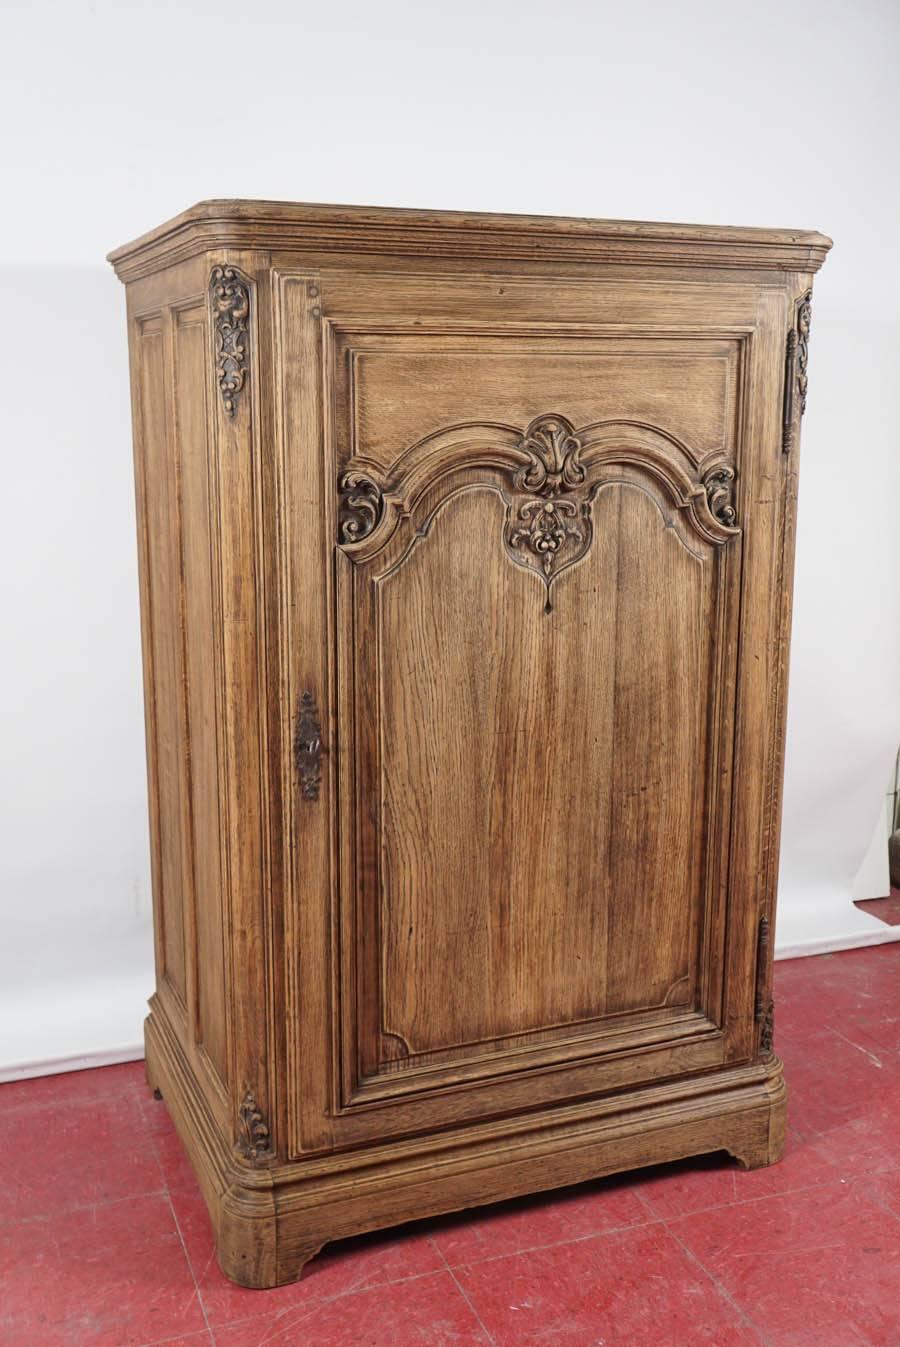 A large version of a French confiture, hand-carved with Rococo design on the front and double paneling on the sides. Hinged door with lock and key and two shelves inside. Possible one-of-a-kind use as a bar or for linens.